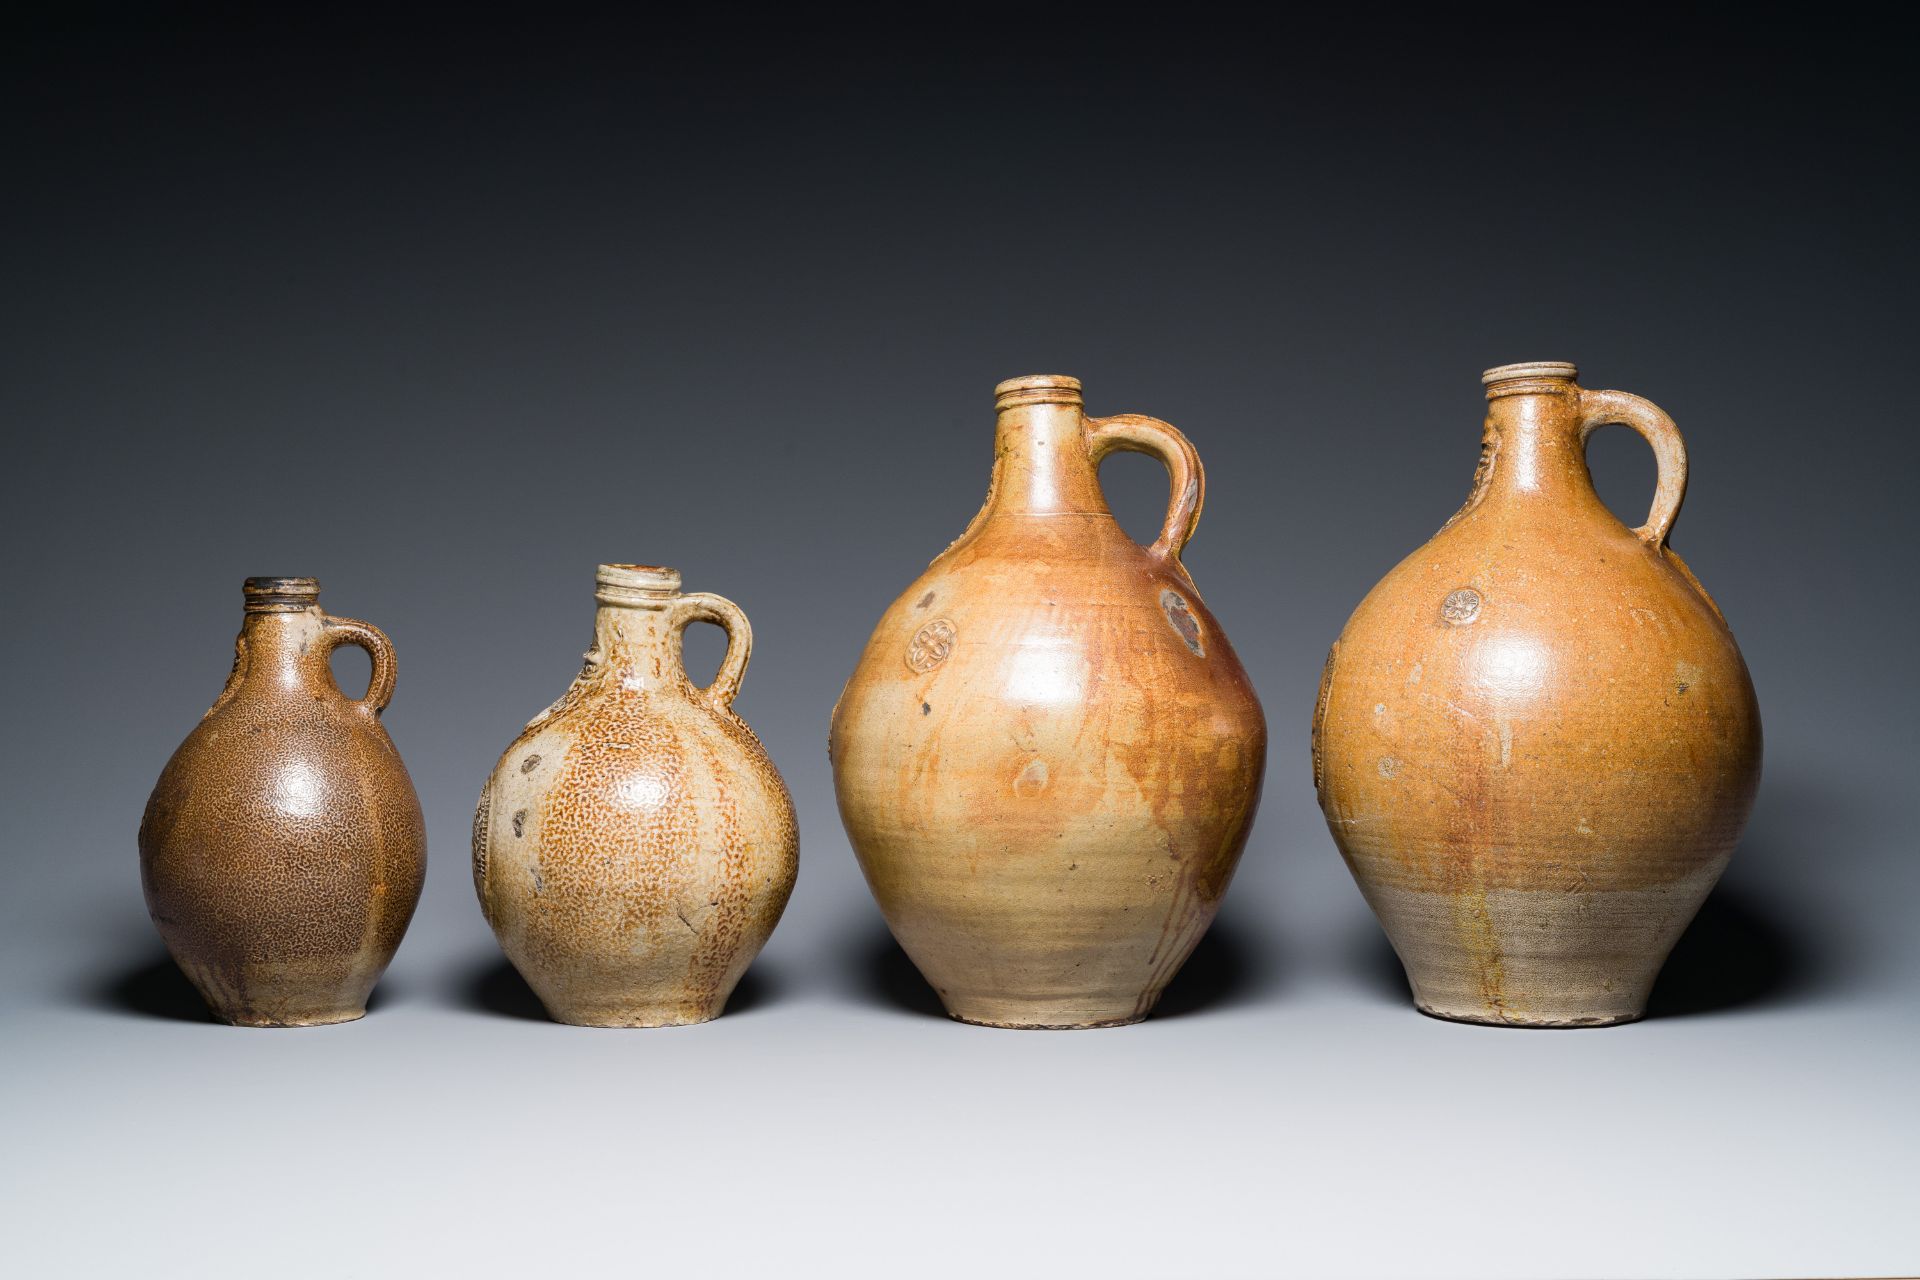 Four stoneware bellarmine jugs with various seals, Frechen and Cologne, Germany, early 17th C. - Image 4 of 7